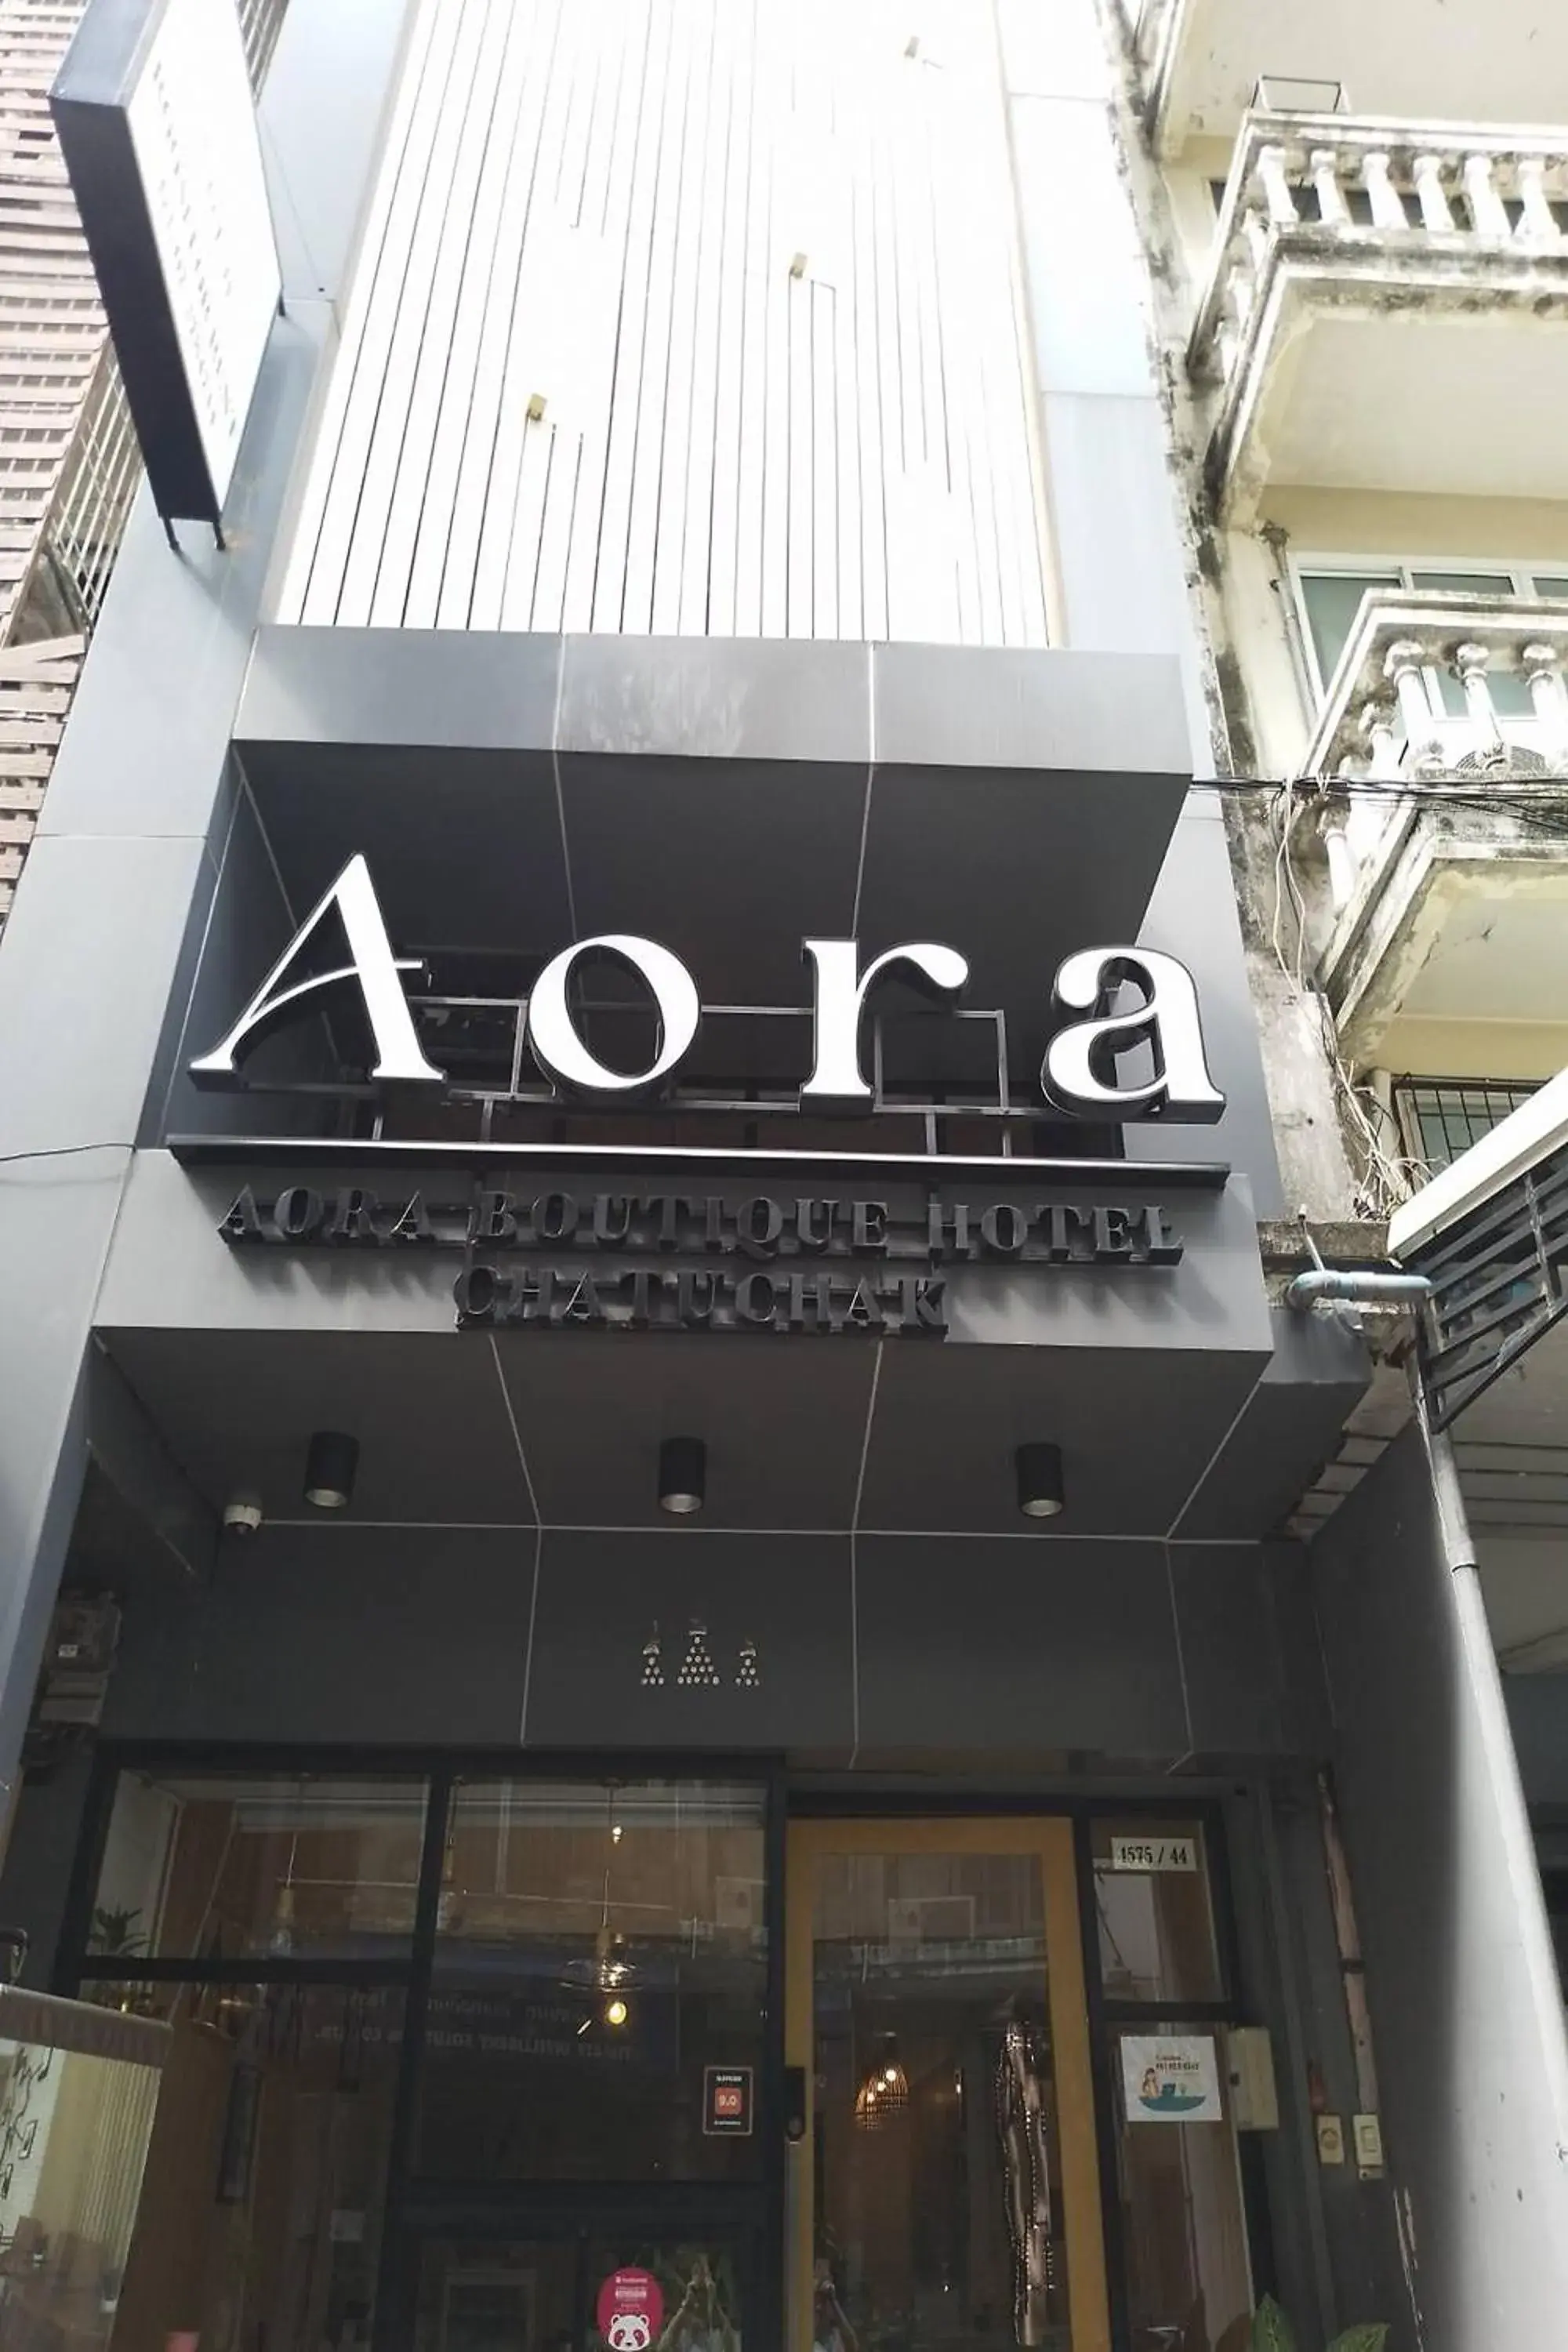 Property building in Aora Boutique Hotel Chatuchak